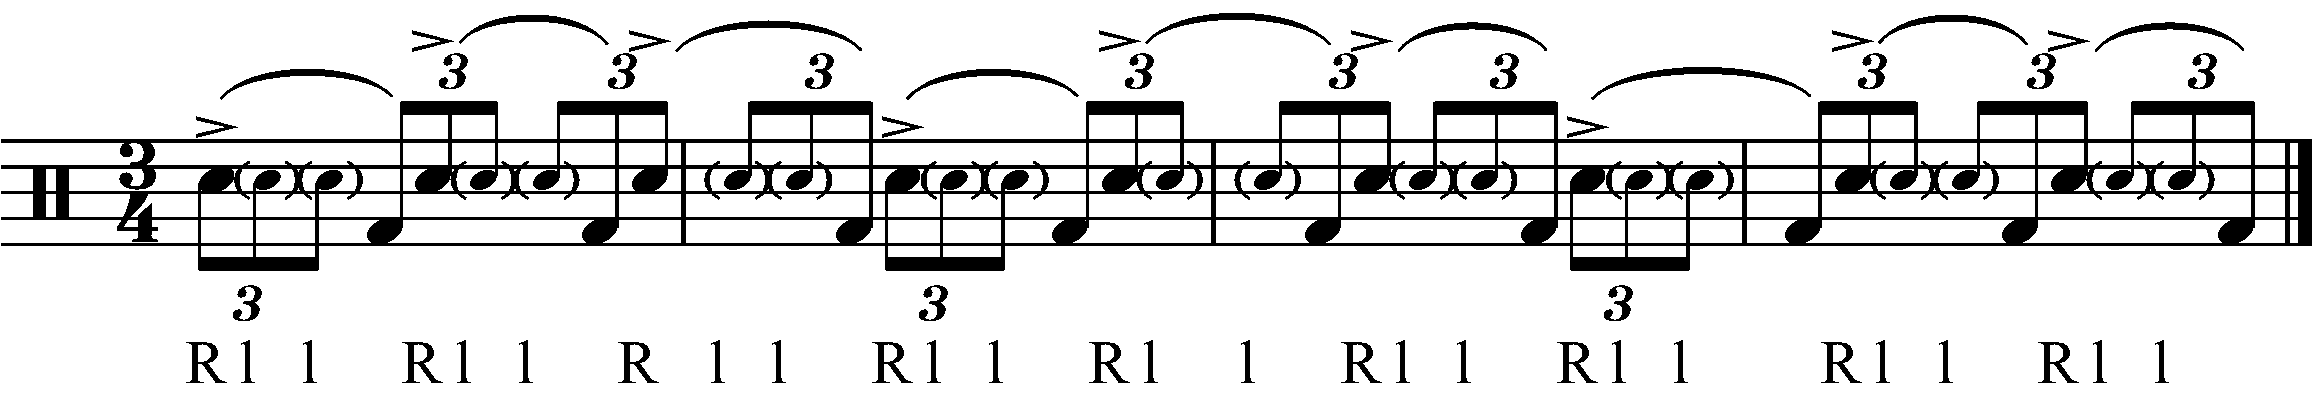 The RLLF exercise played over triplets in 3/4.